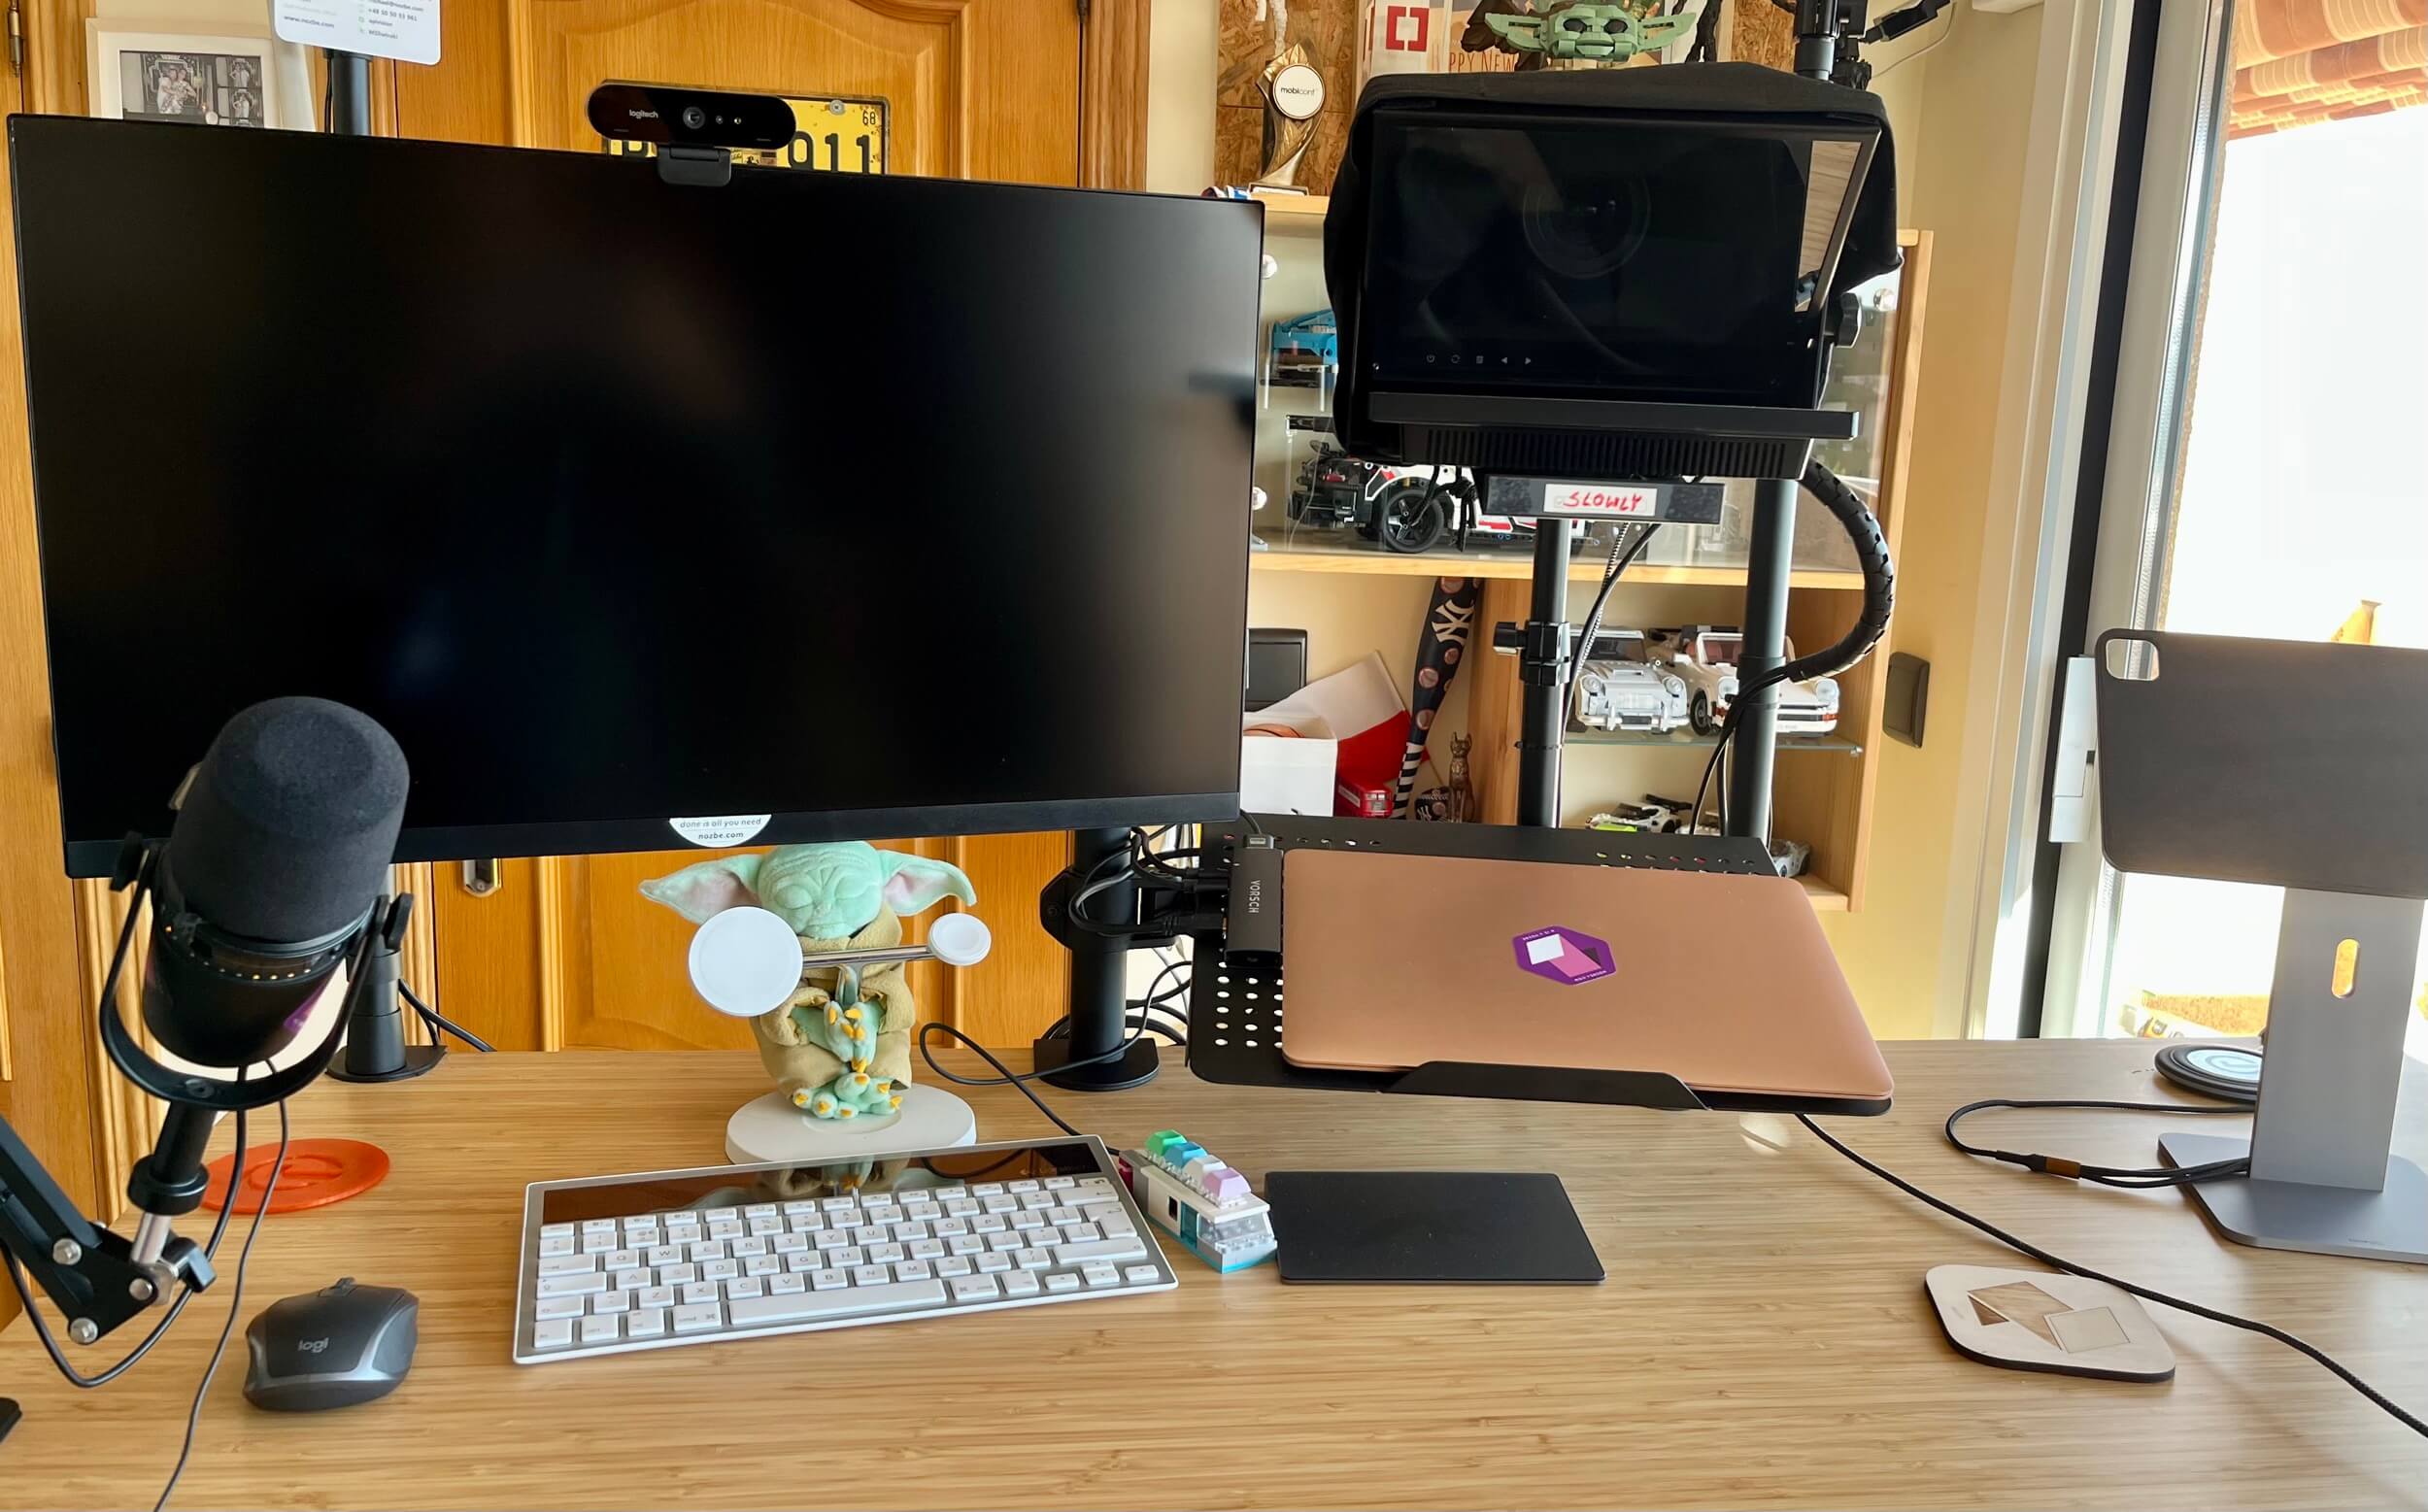 M1 MacBook Air changed my home office setup for 2023 completely!